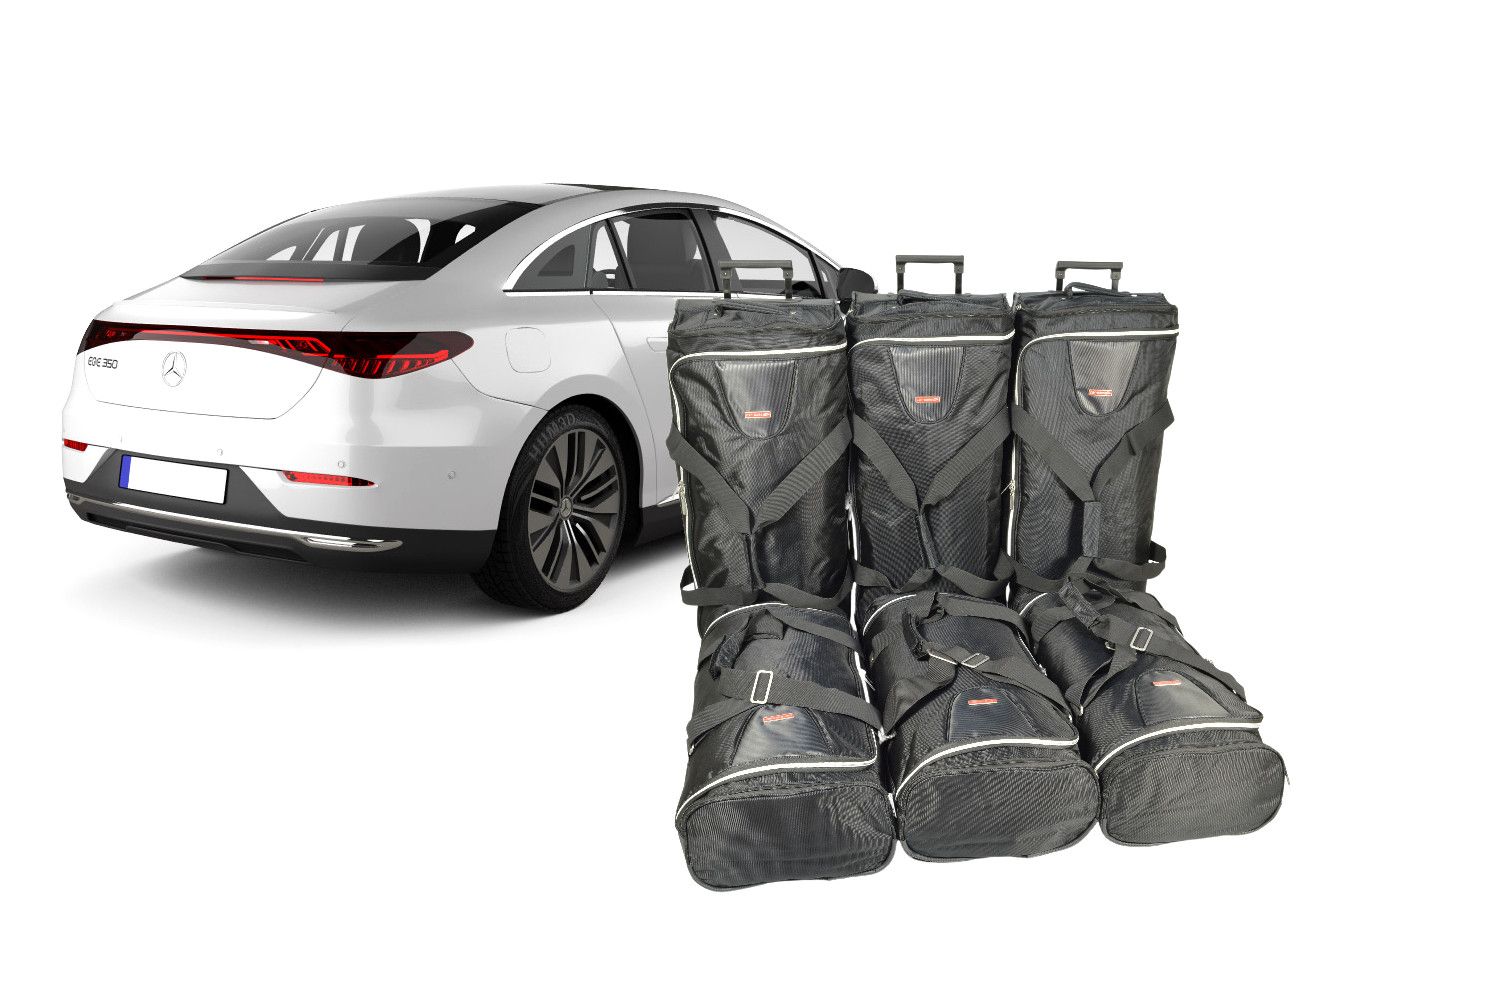 Want to buy a durable Mercedes-Benz cover? - Car-Bags custom made